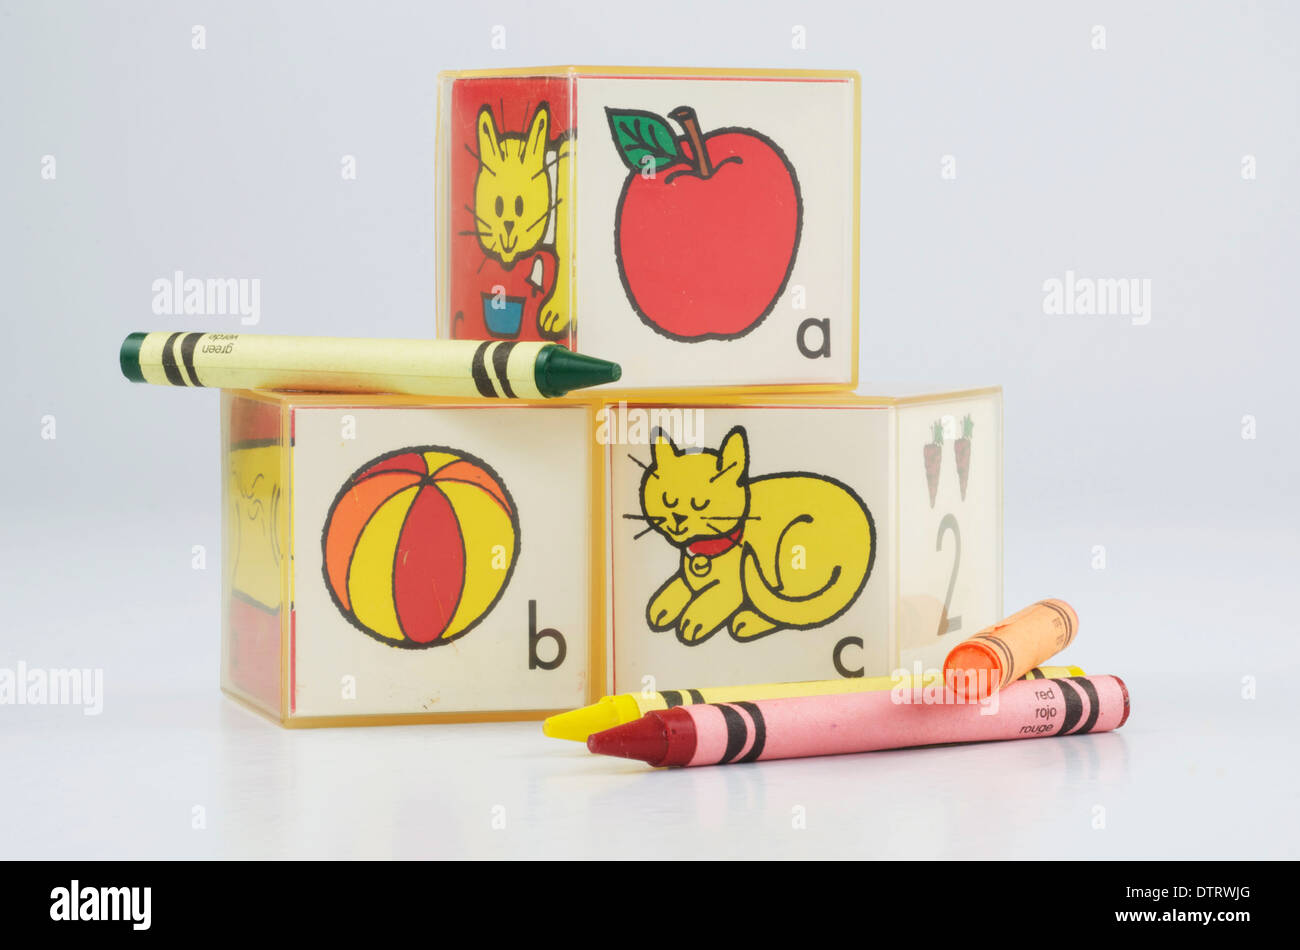 Educational Plastic preschool blocks with ABC's and picture of an apple,ball, and cat. Crayons of red green,yellow,and orange. Stock Photo